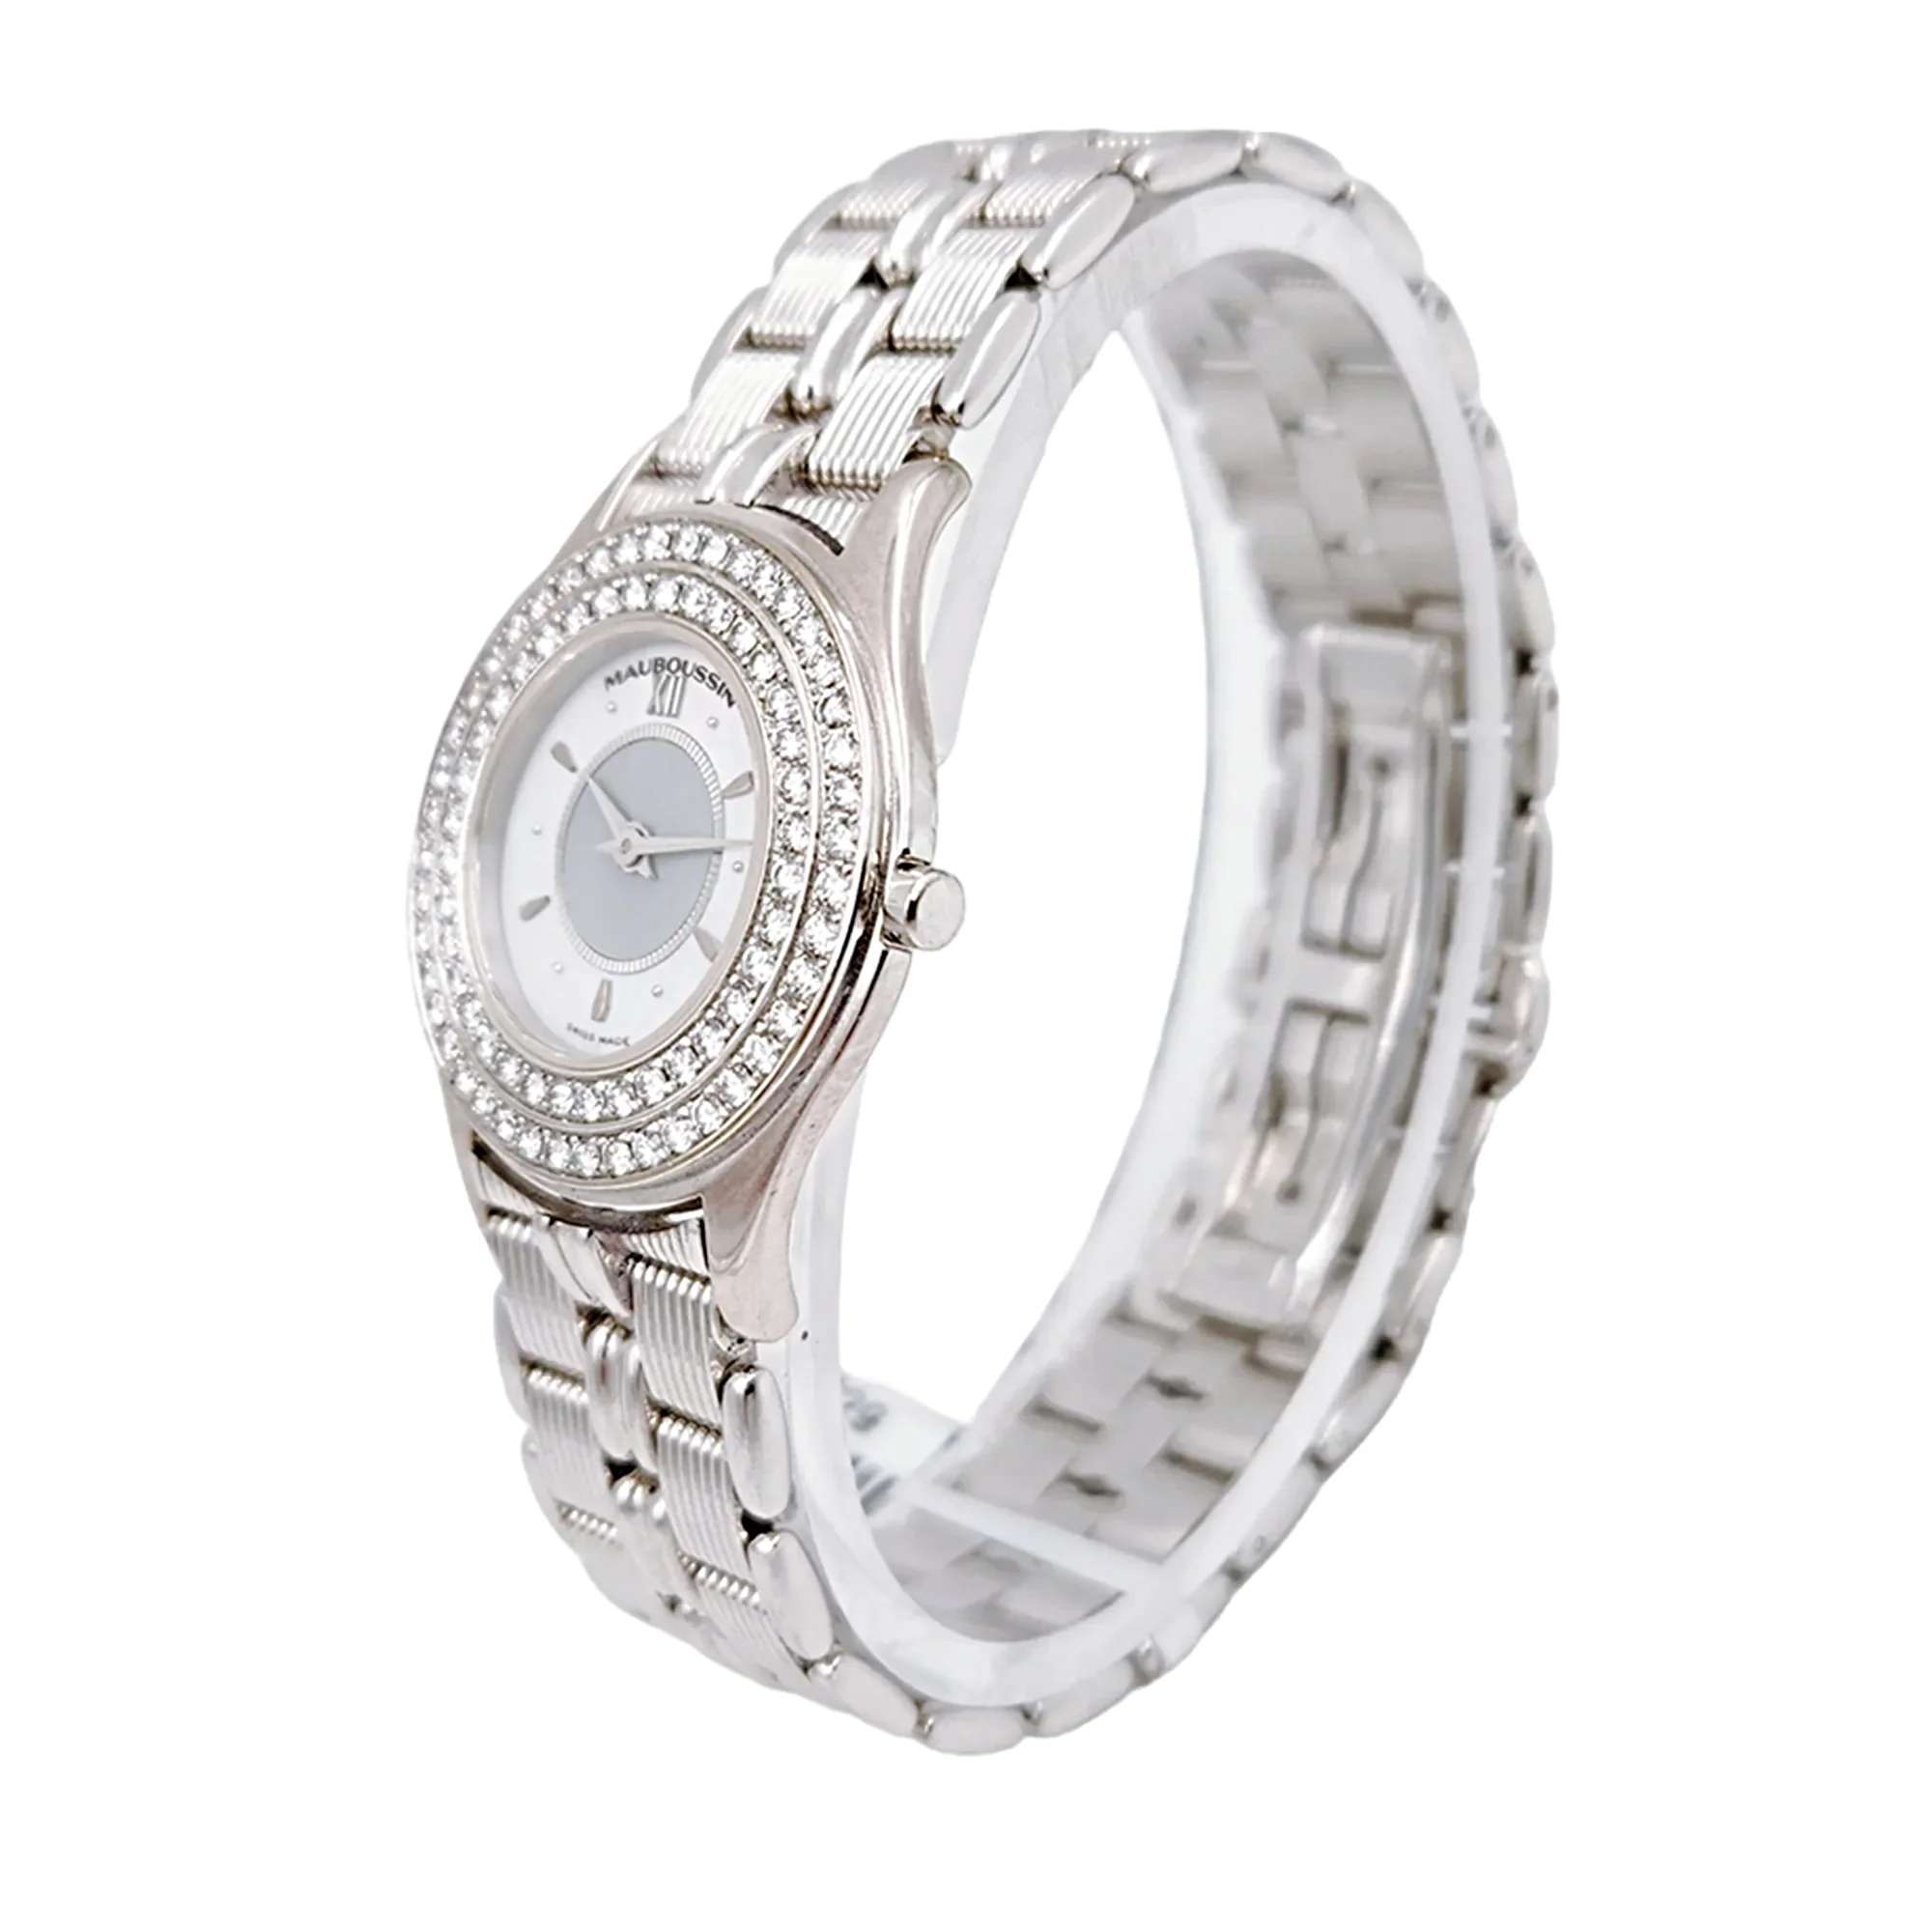 Ladies Mauboussin 26mm - 18K White Gold Watch With Mother of Peal Dial and Diamond Bezel. (Pre-Owned 63683)